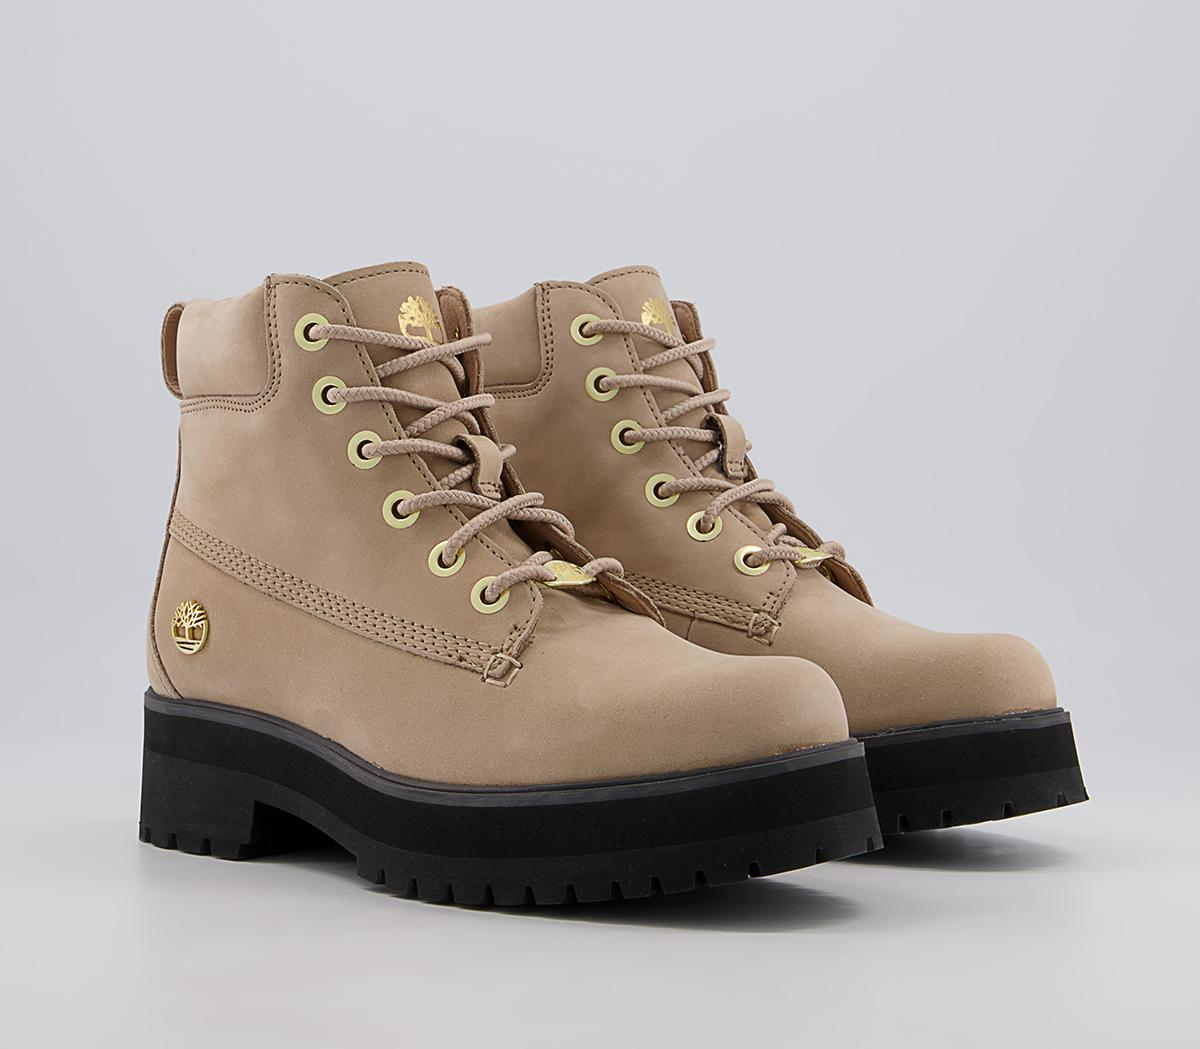 Timberland 6 Inch Stack Boots Light Brown Nubuck - Neutral Colour Shoes